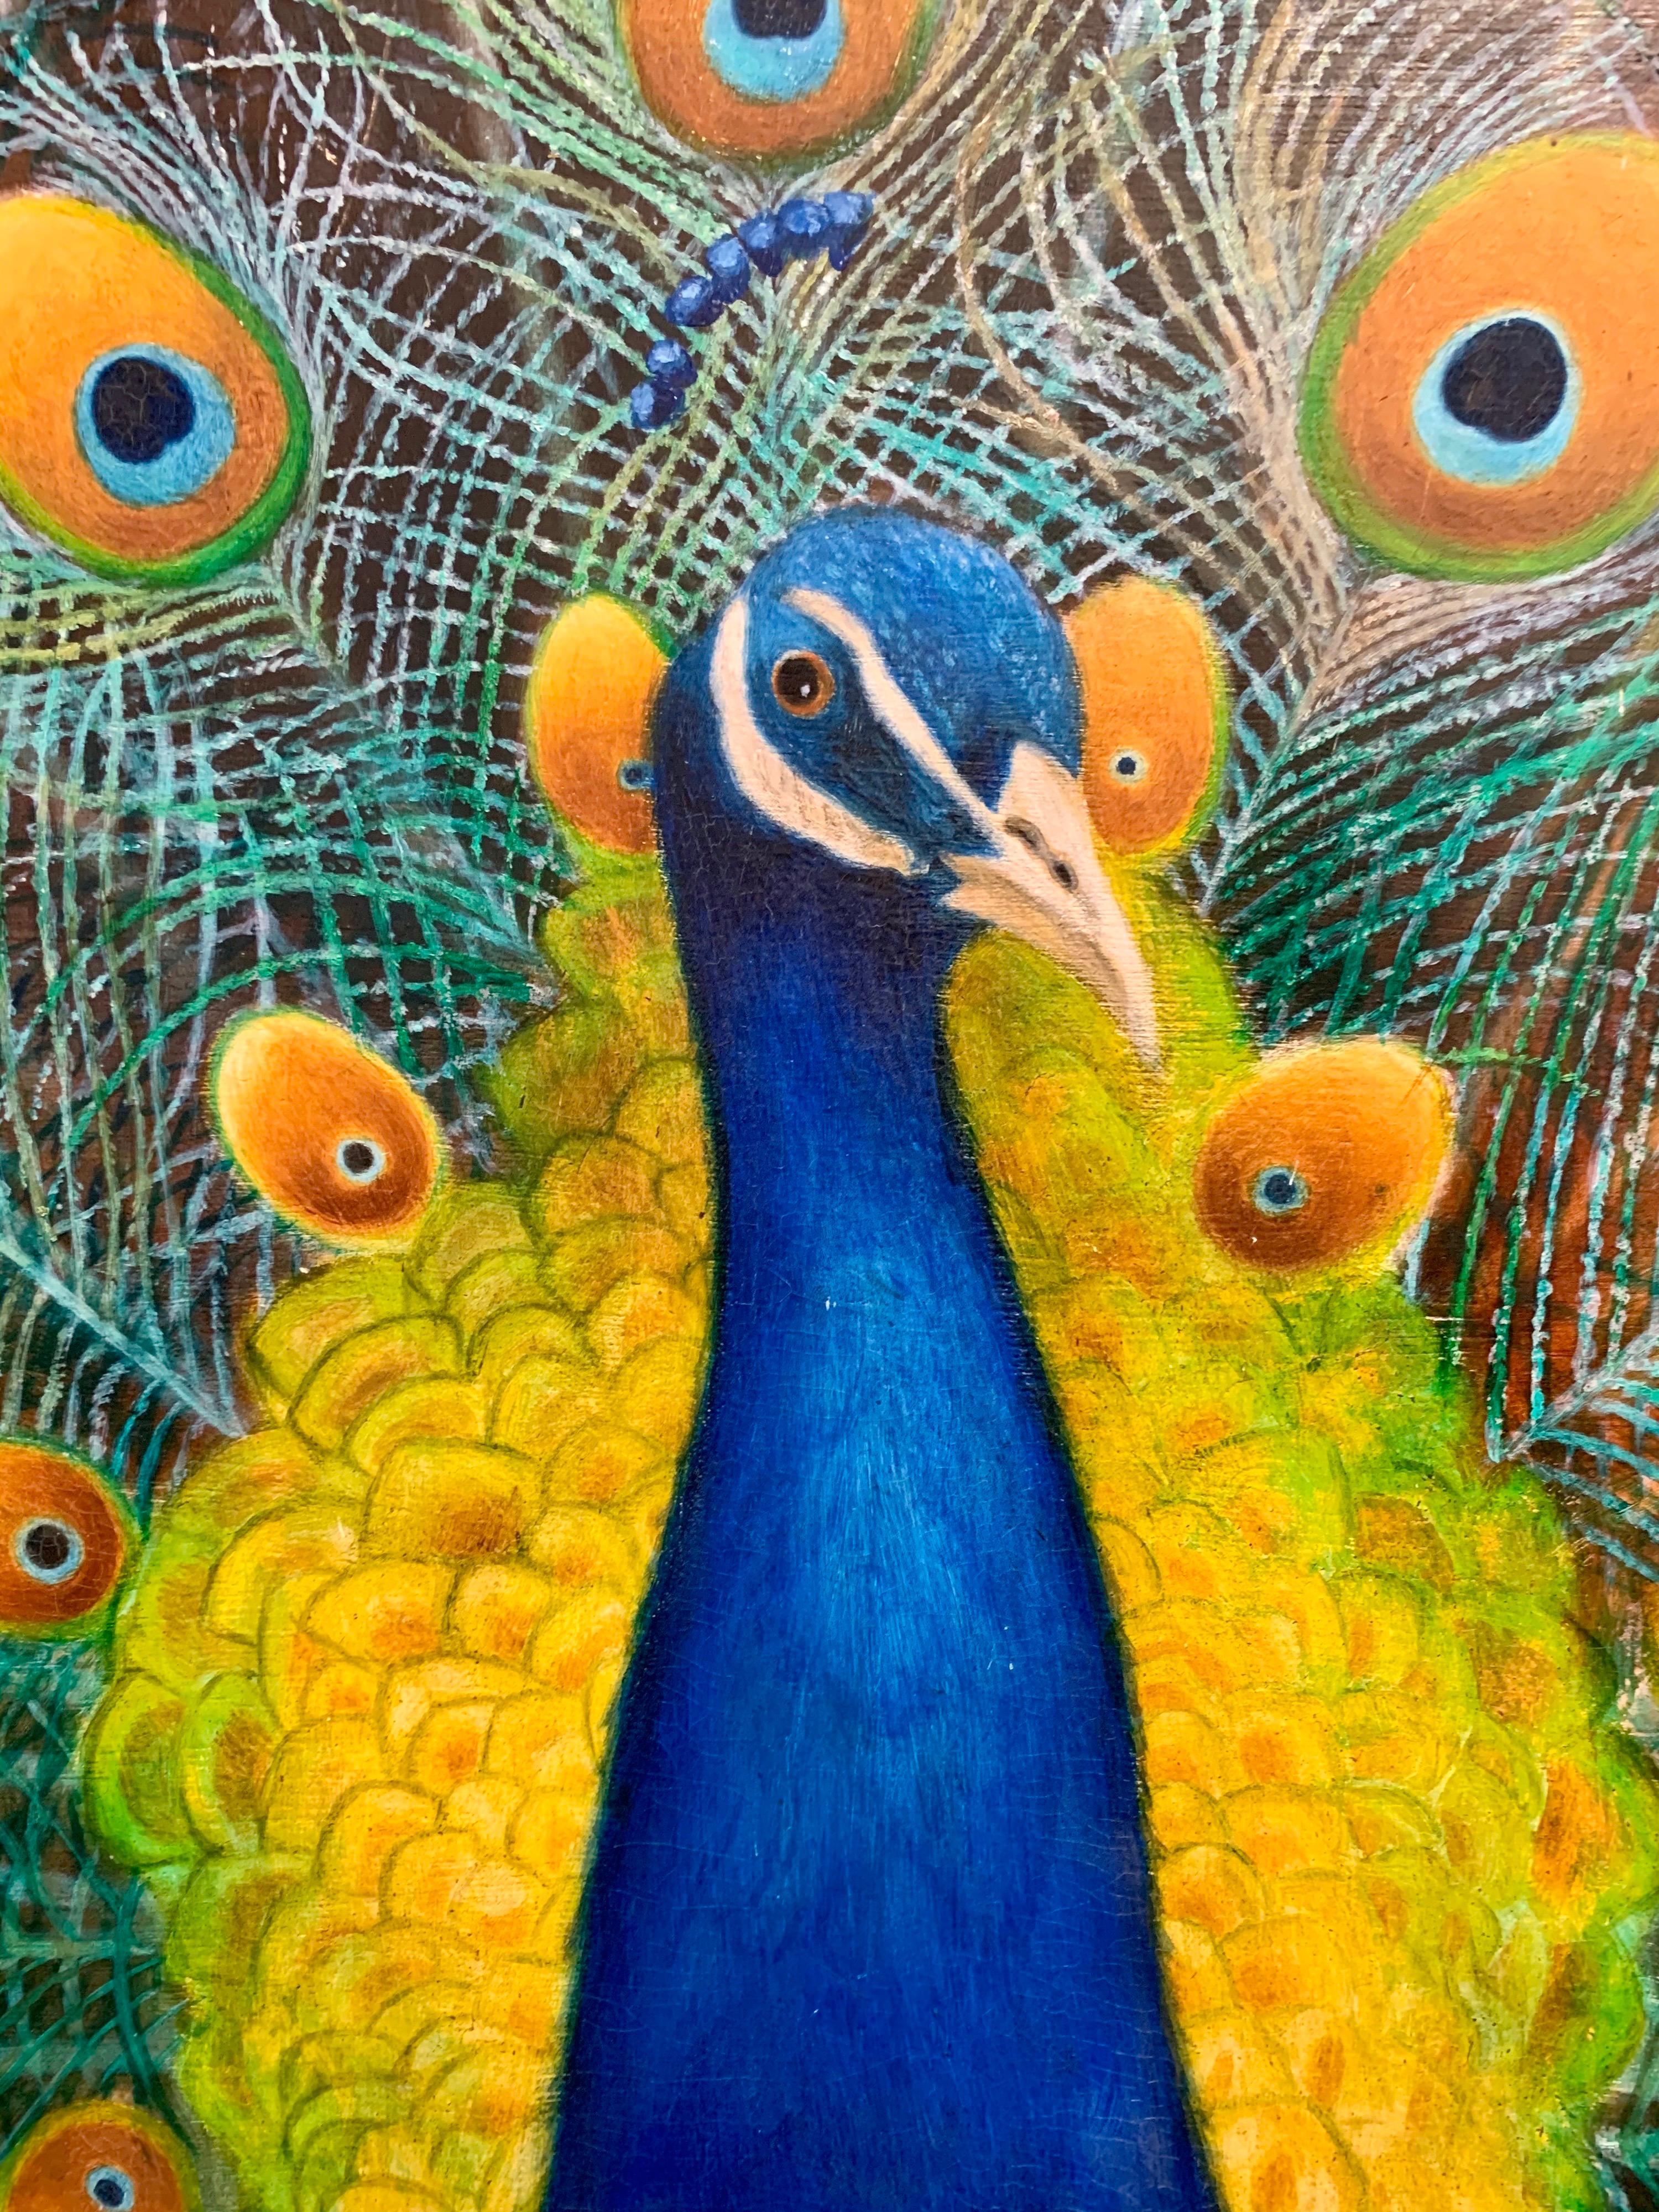 Linen Tall Original Peacock Painting Signed